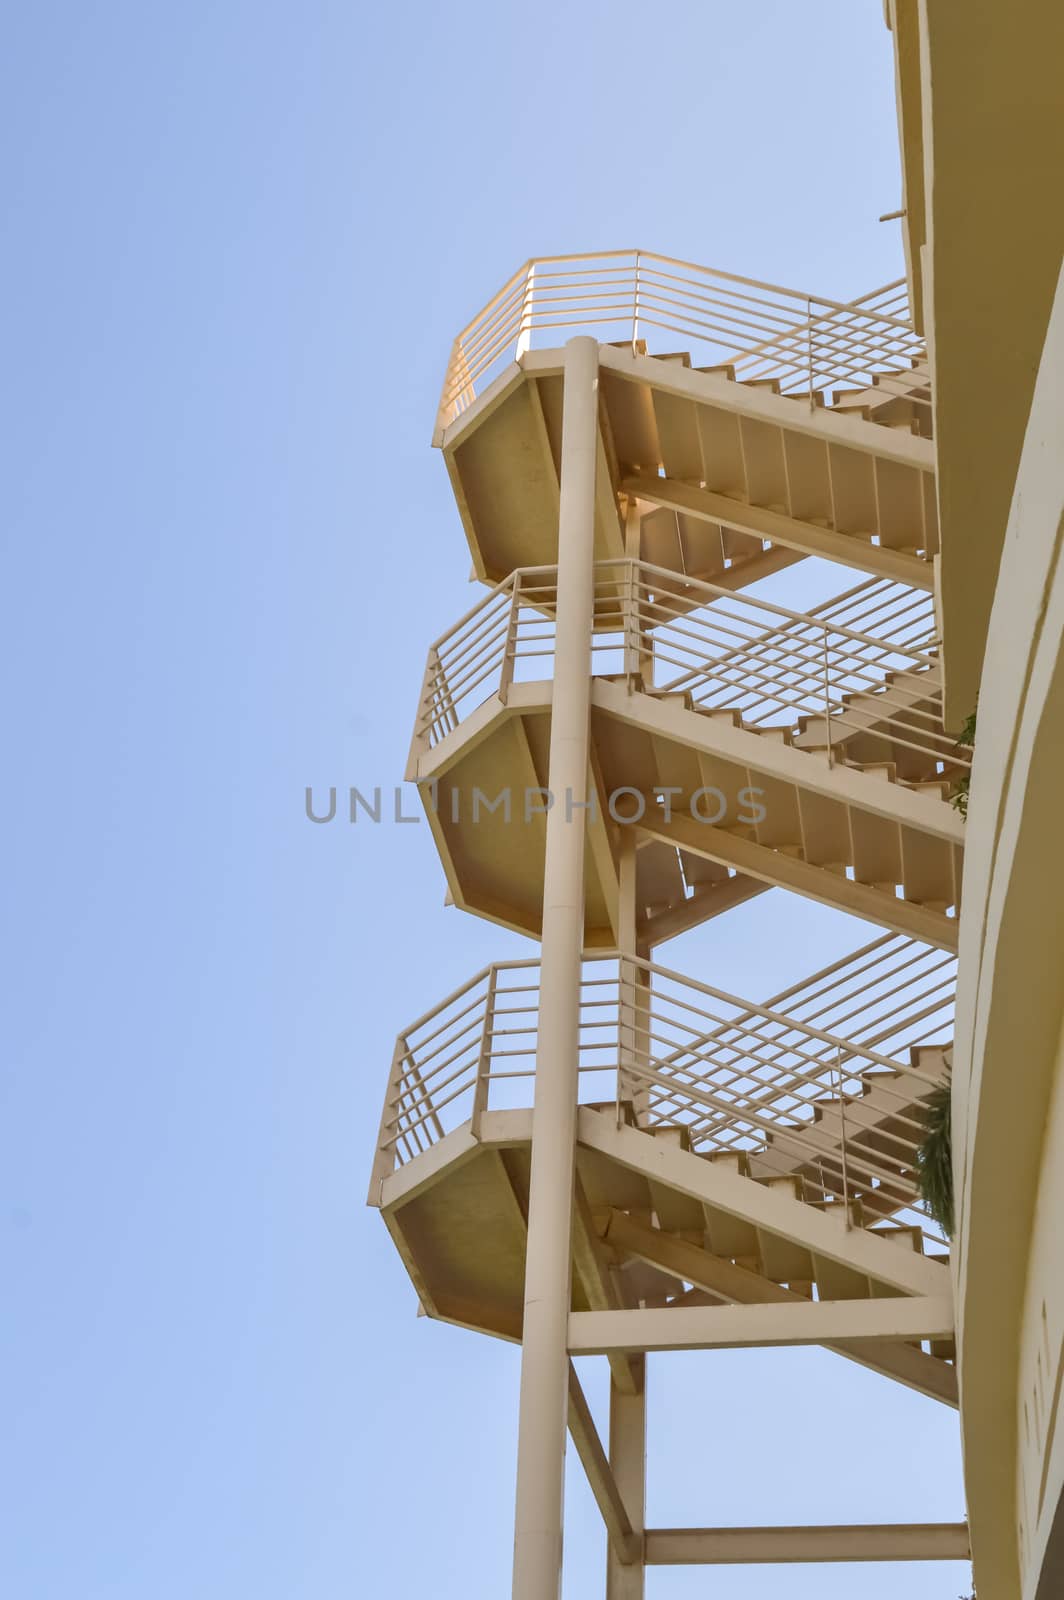 Exterior staircases in a hotel on the island of Crete